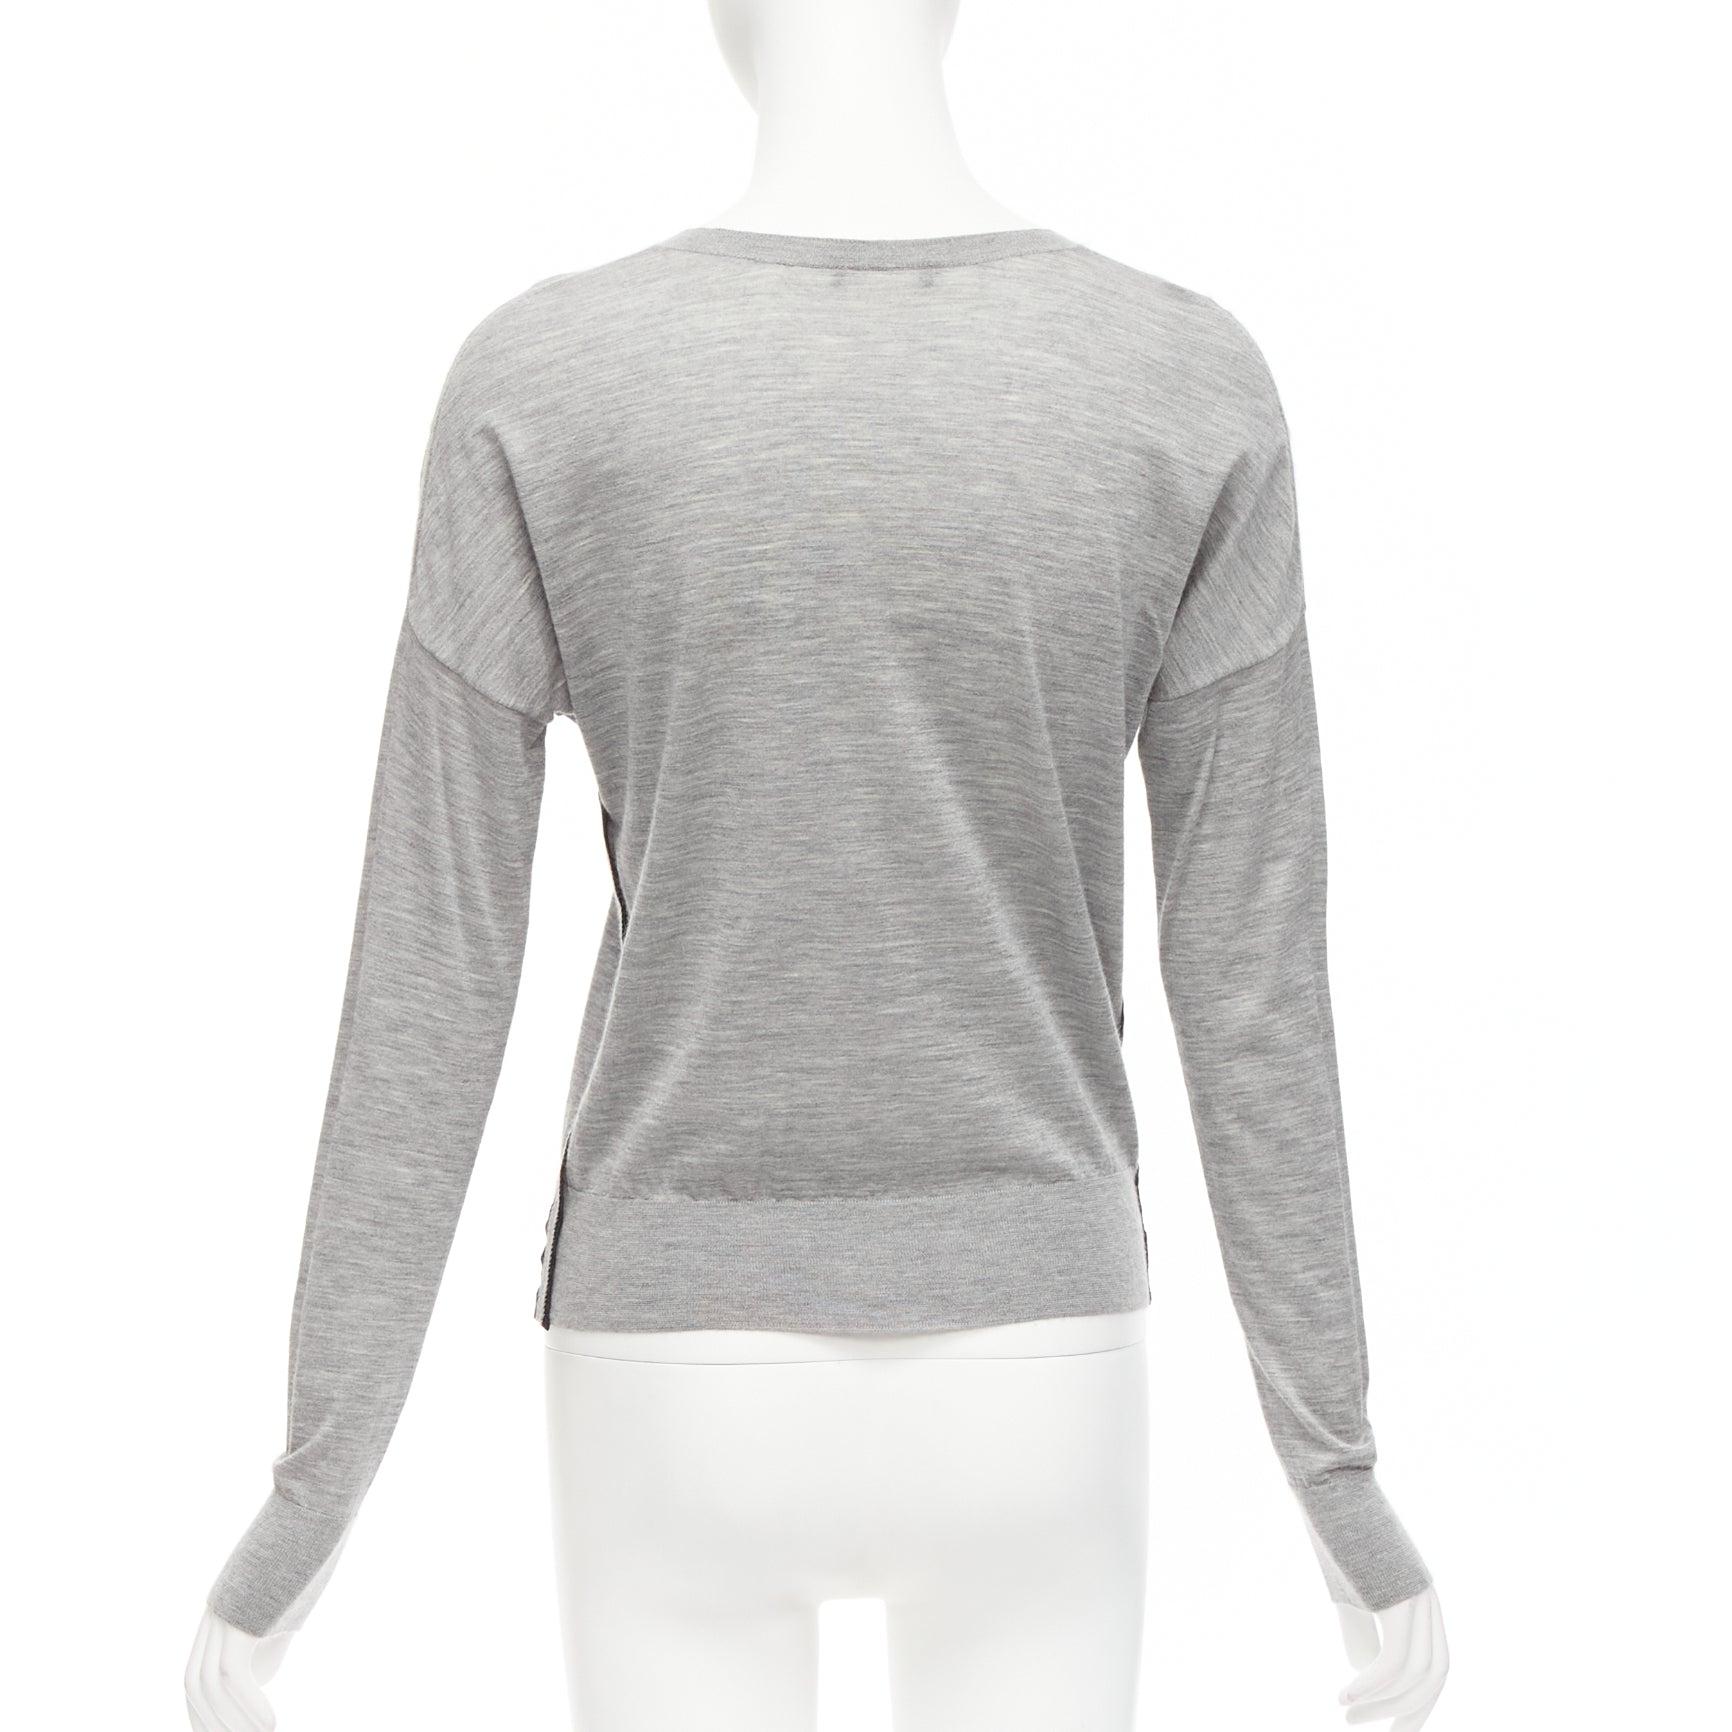 LOUIS VUITTON grey soft knit black beaded LV logo V neck pullover top For Sale 1